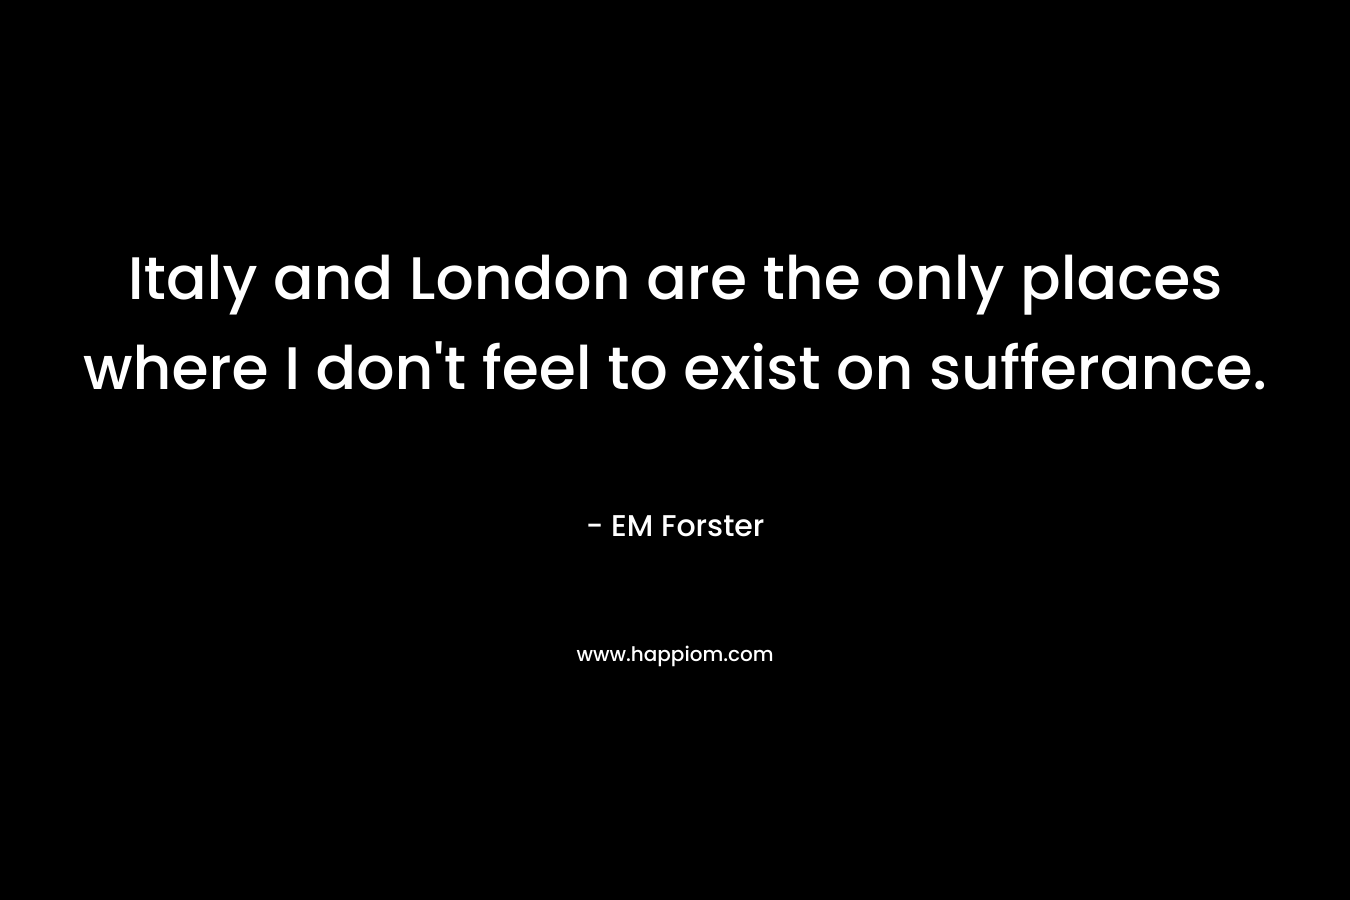 Italy and London are the only places where I don't feel to exist on sufferance.